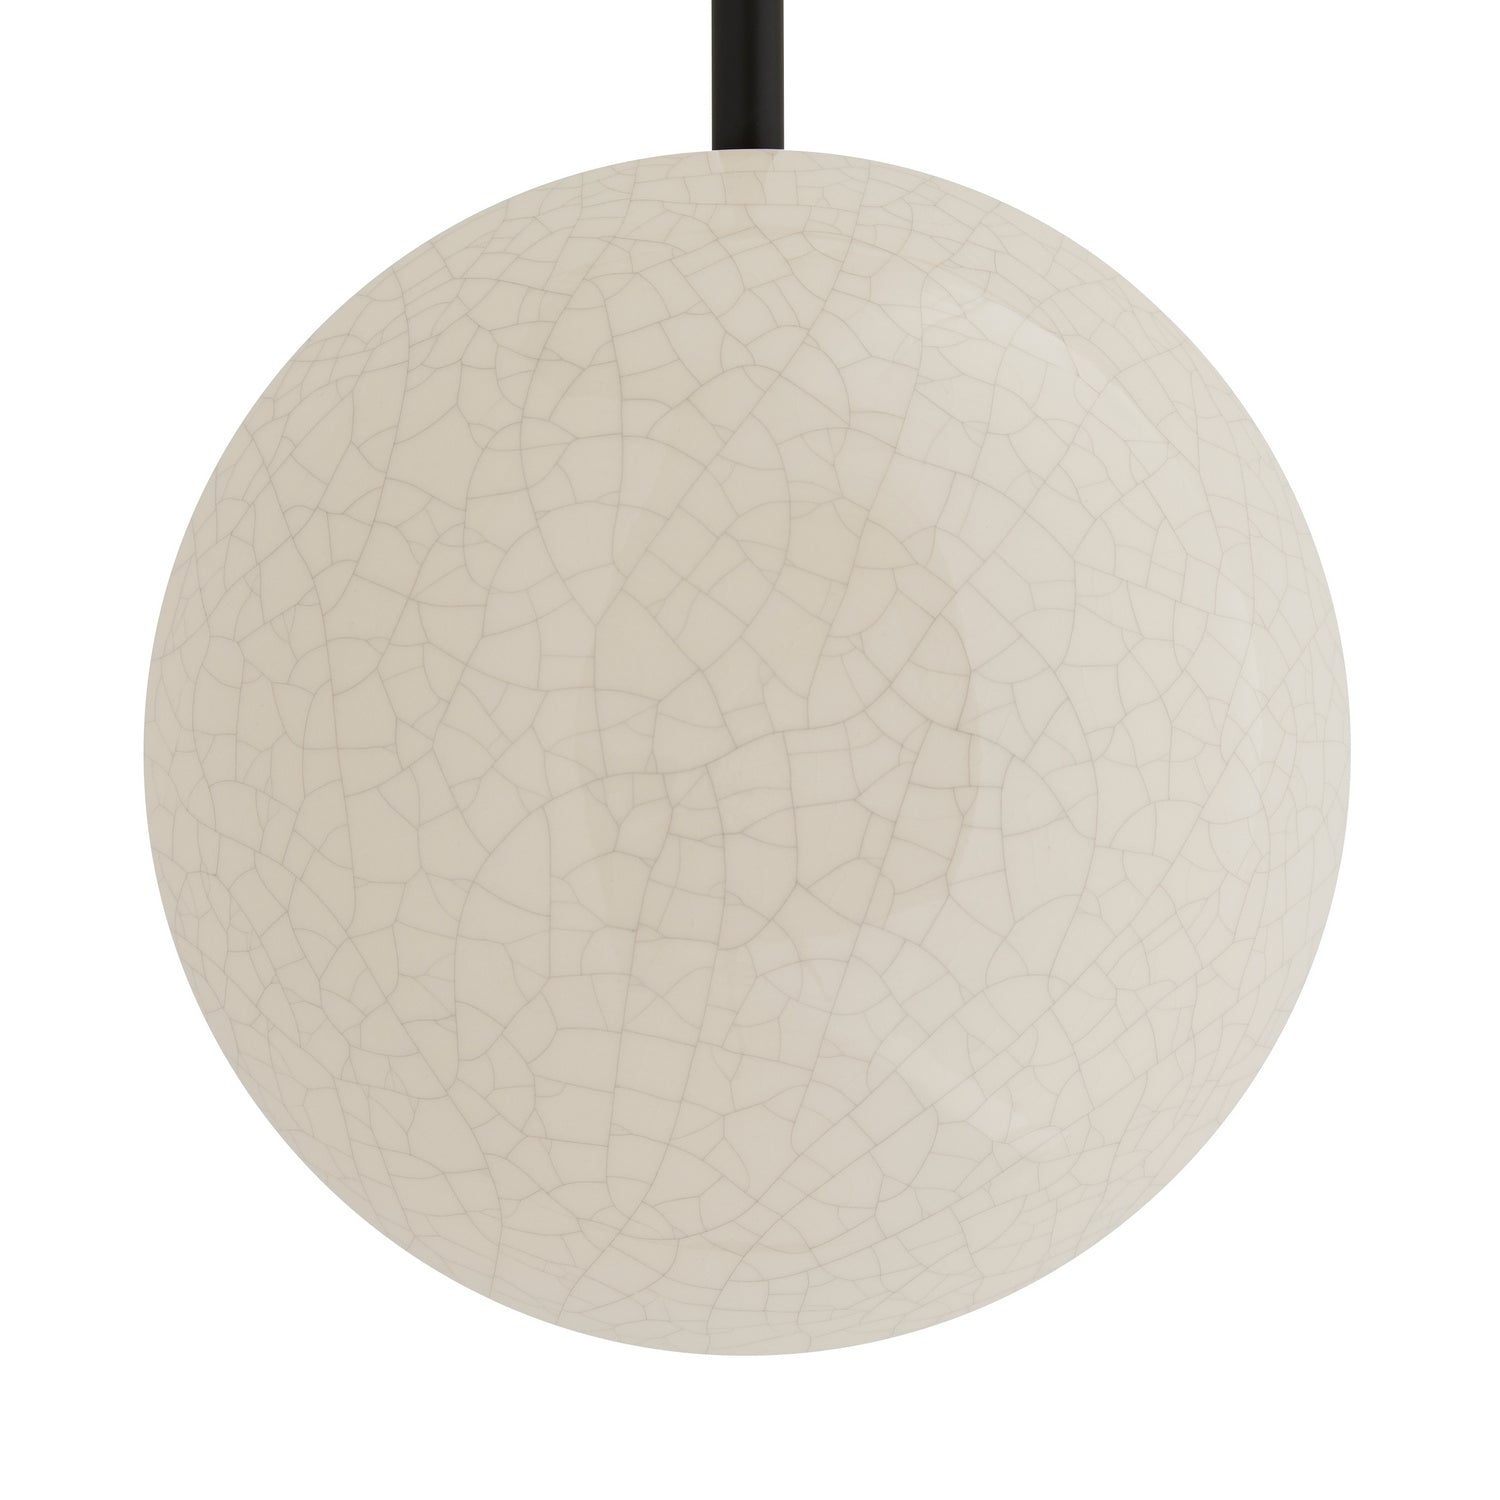 Five Light Wall Sconce from the Glaze collection in Ivory Stained Crackle finish